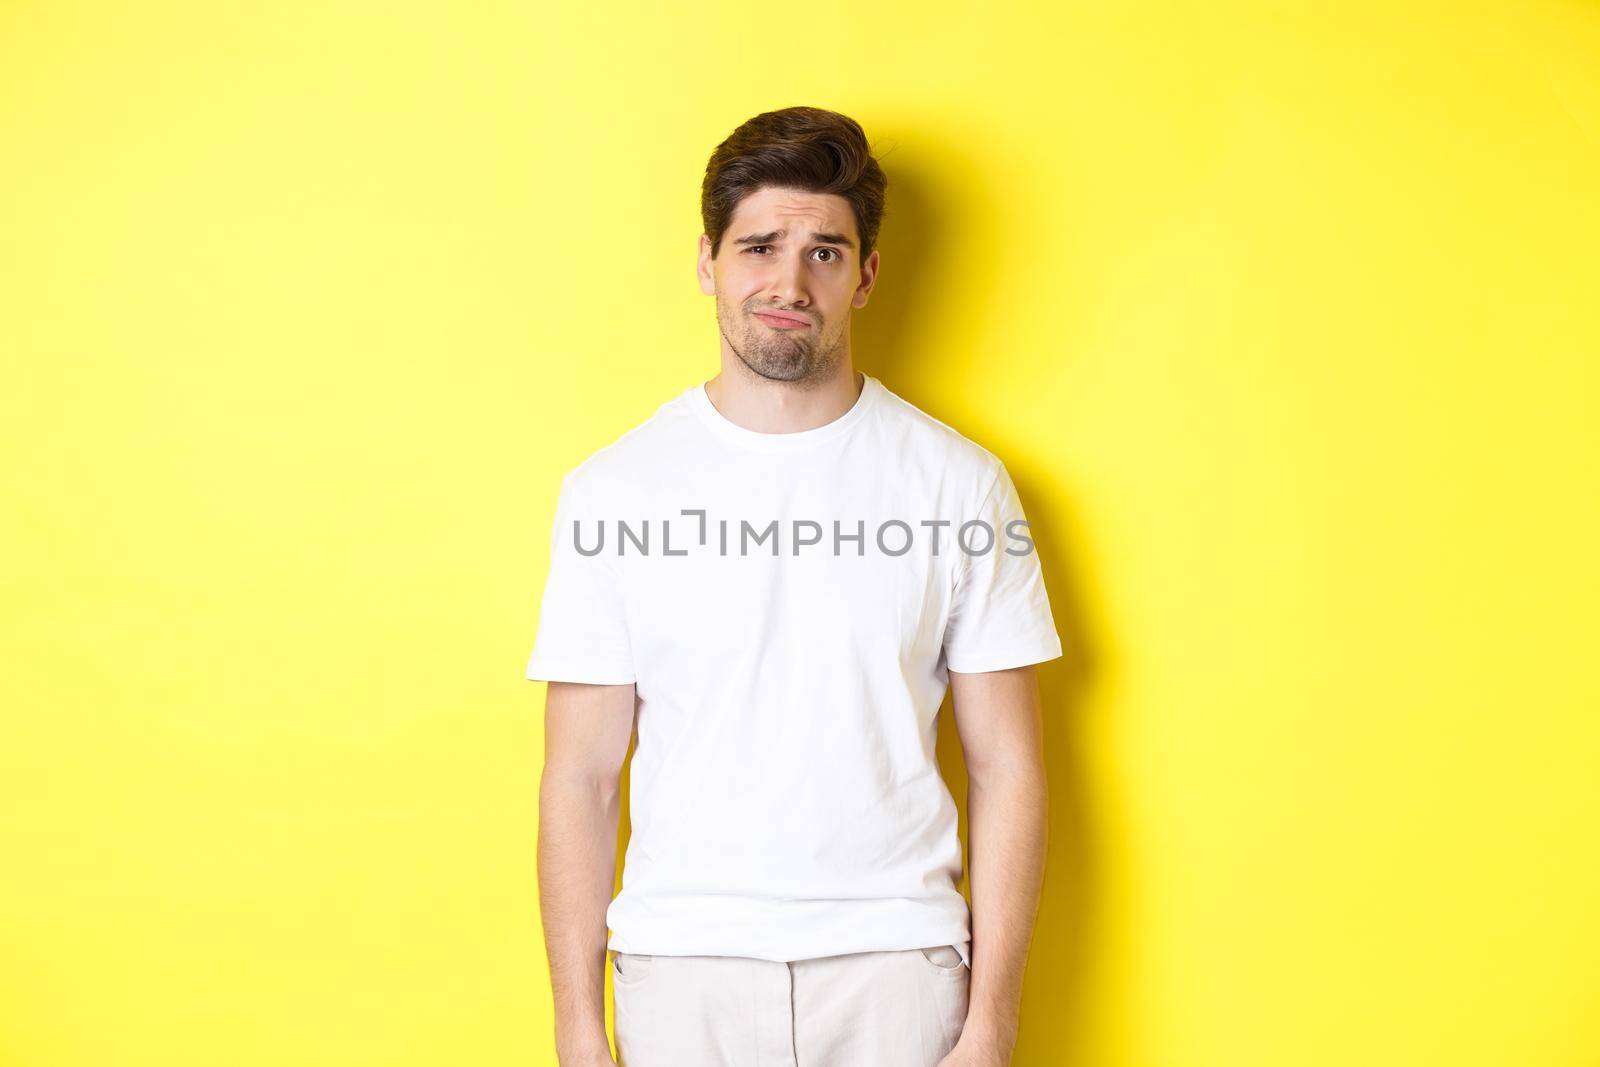 Disappointed guy looking upset, sulking and frowning, standing displeased against yellow background.